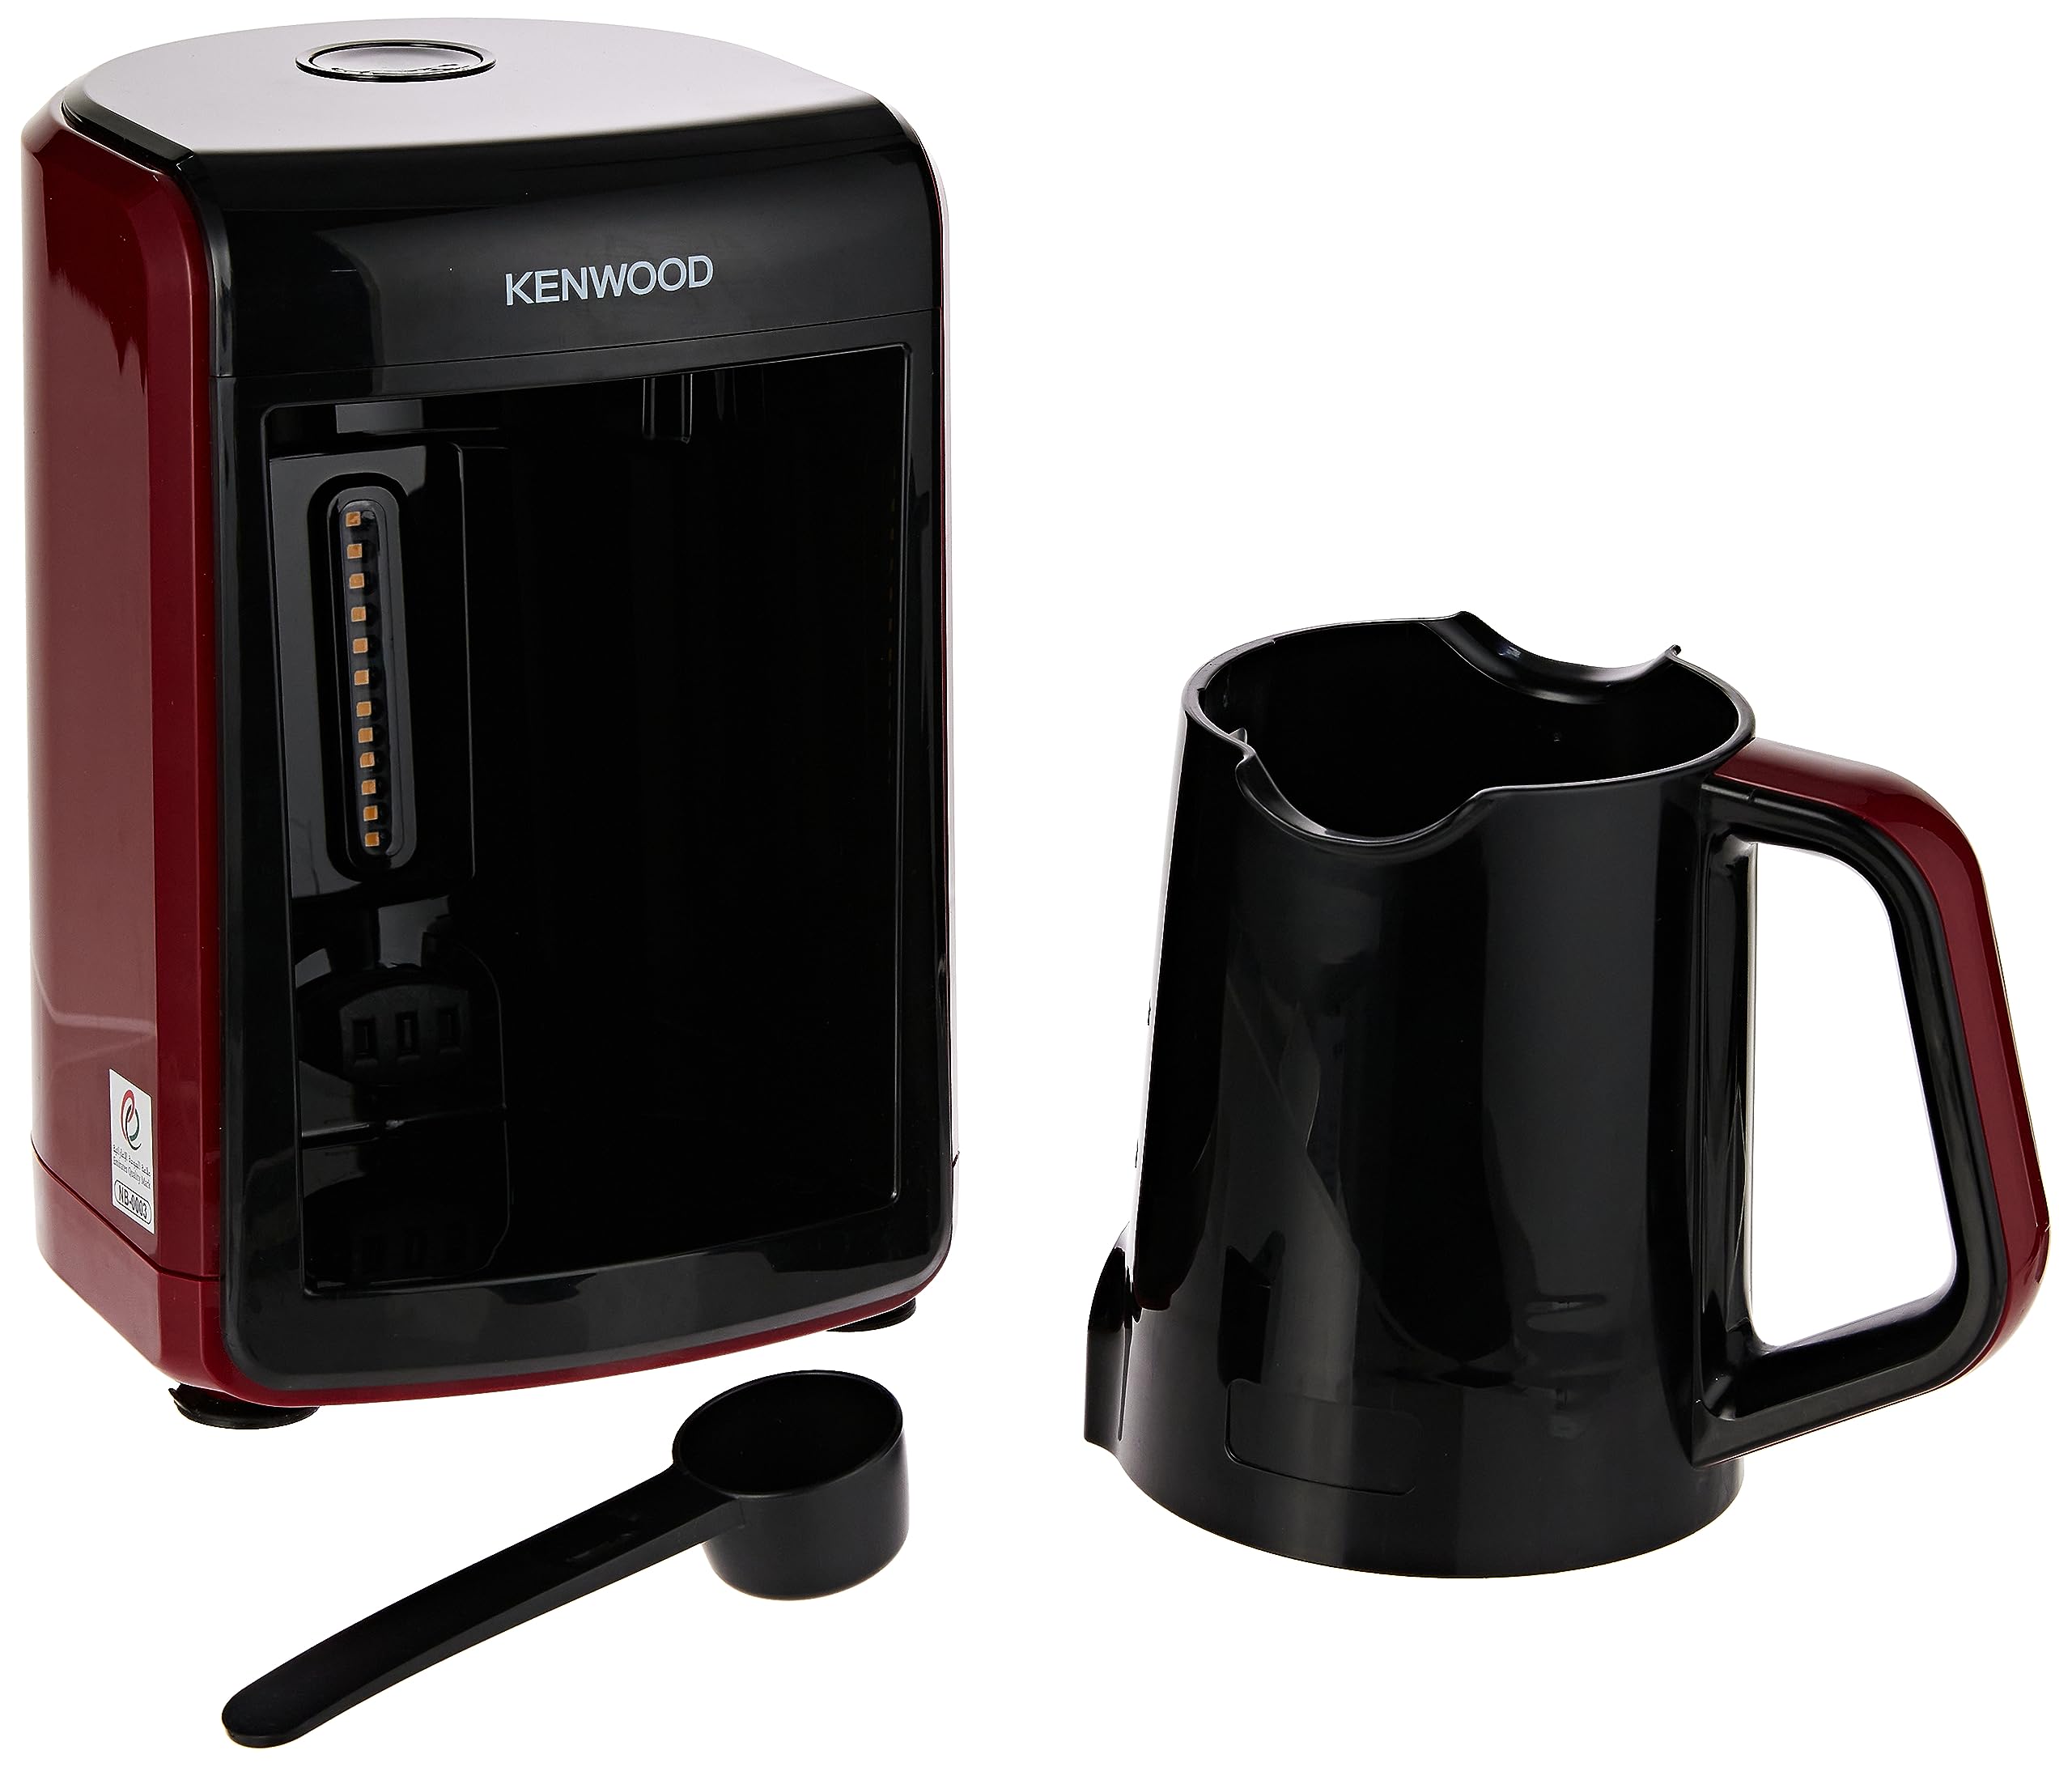 Kenwood Turkish Coffee Maker Up To 5 Cups Turkish Coffee Machine For Slowly Brewed Delicious Turkish Coffee 535W Ctp10.000Br Black/Red